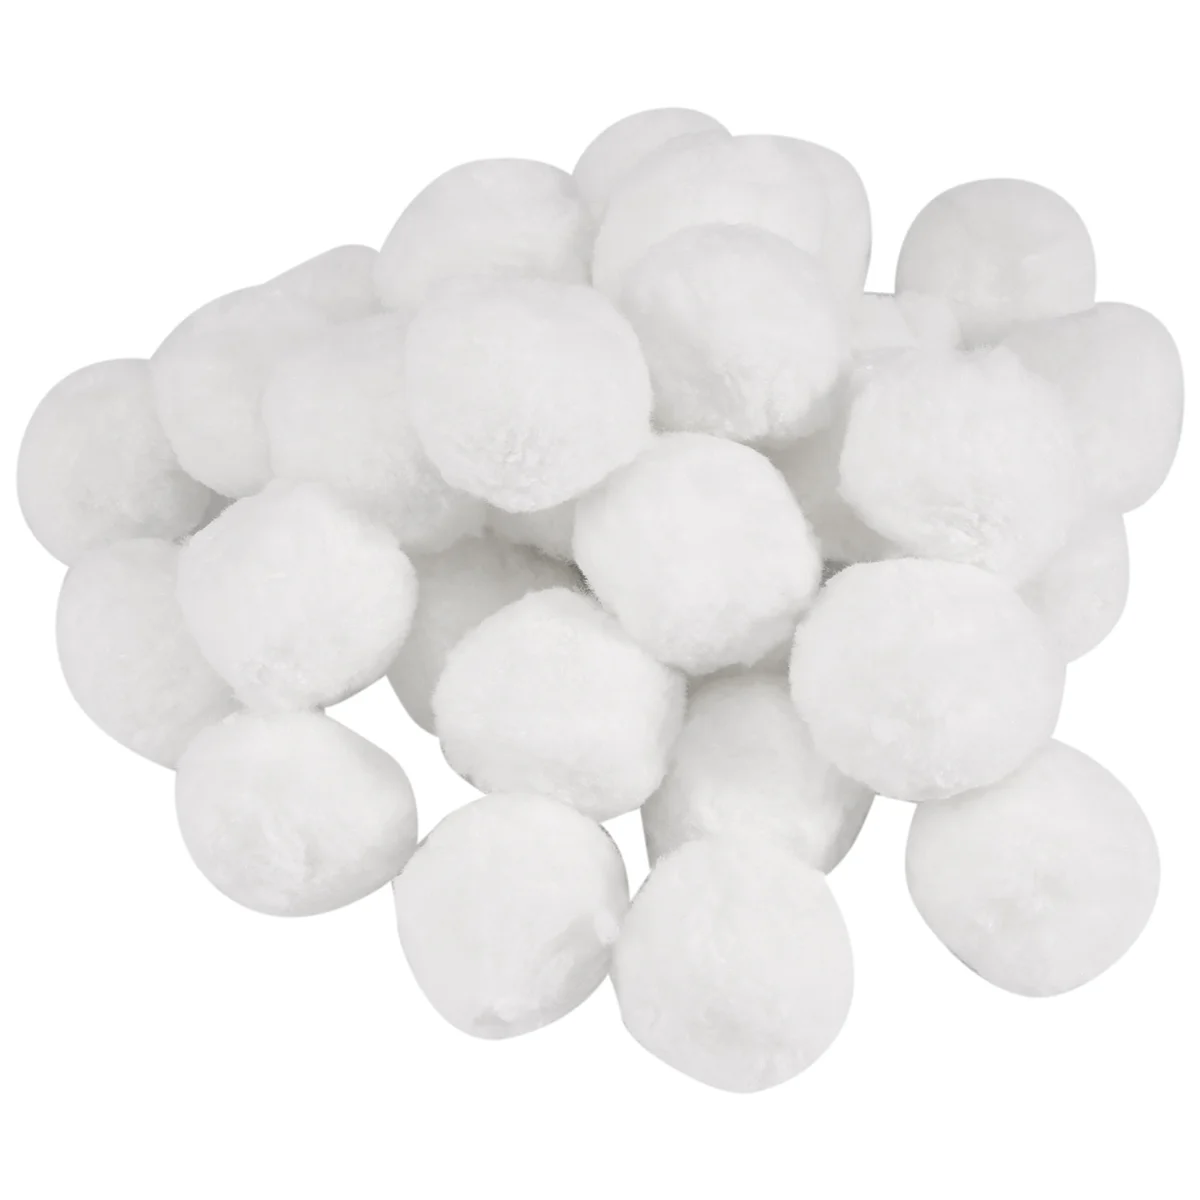 

Swimming Pools Filter Balls Portable Wet Dry Cotton Canister Clean Fish Tank Filter Material Water Purification Fiber 200g